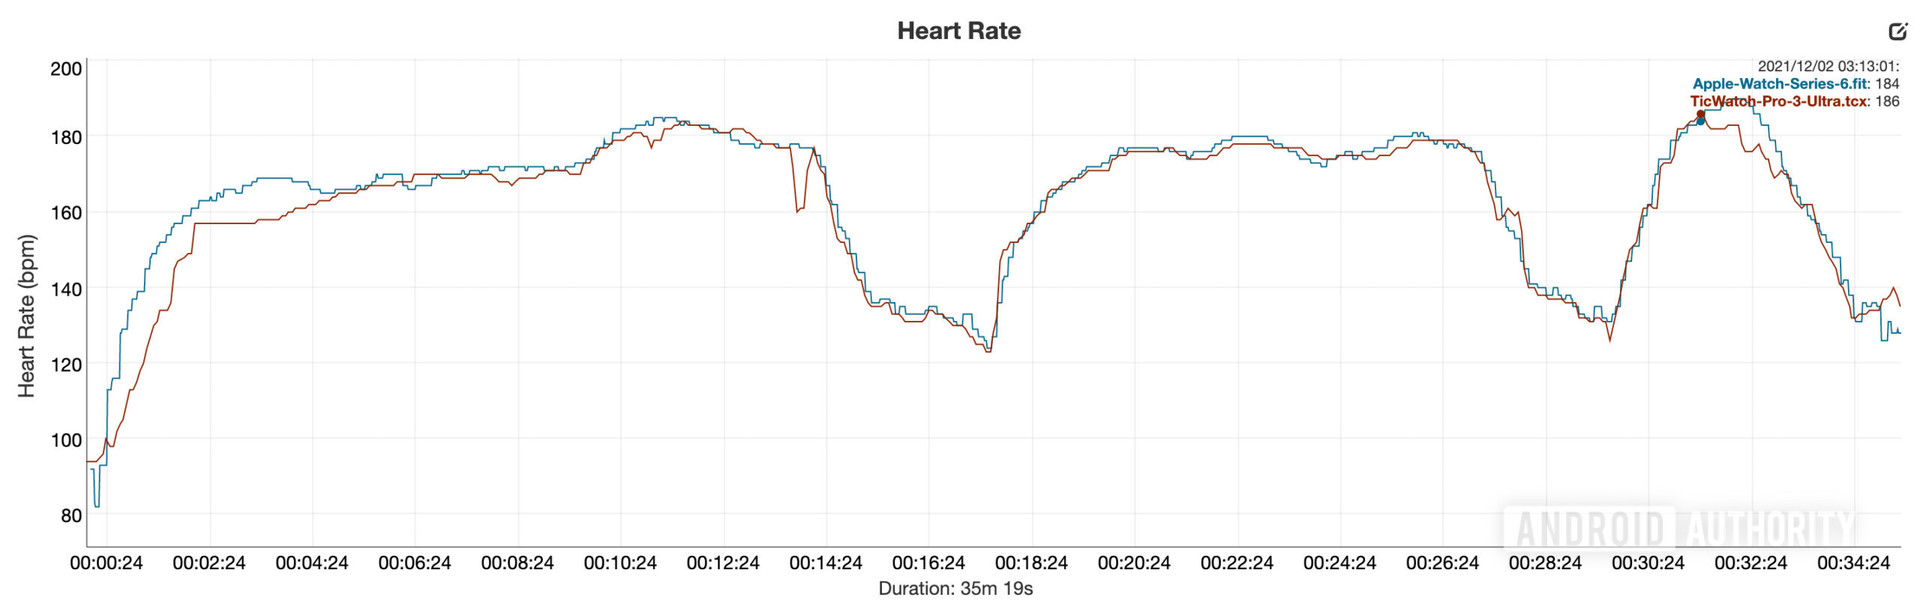 Heart rate data from the Mobvoi TicWatch Pro 3 Ultra review vs Apple Watch Series 6 heart rate data.